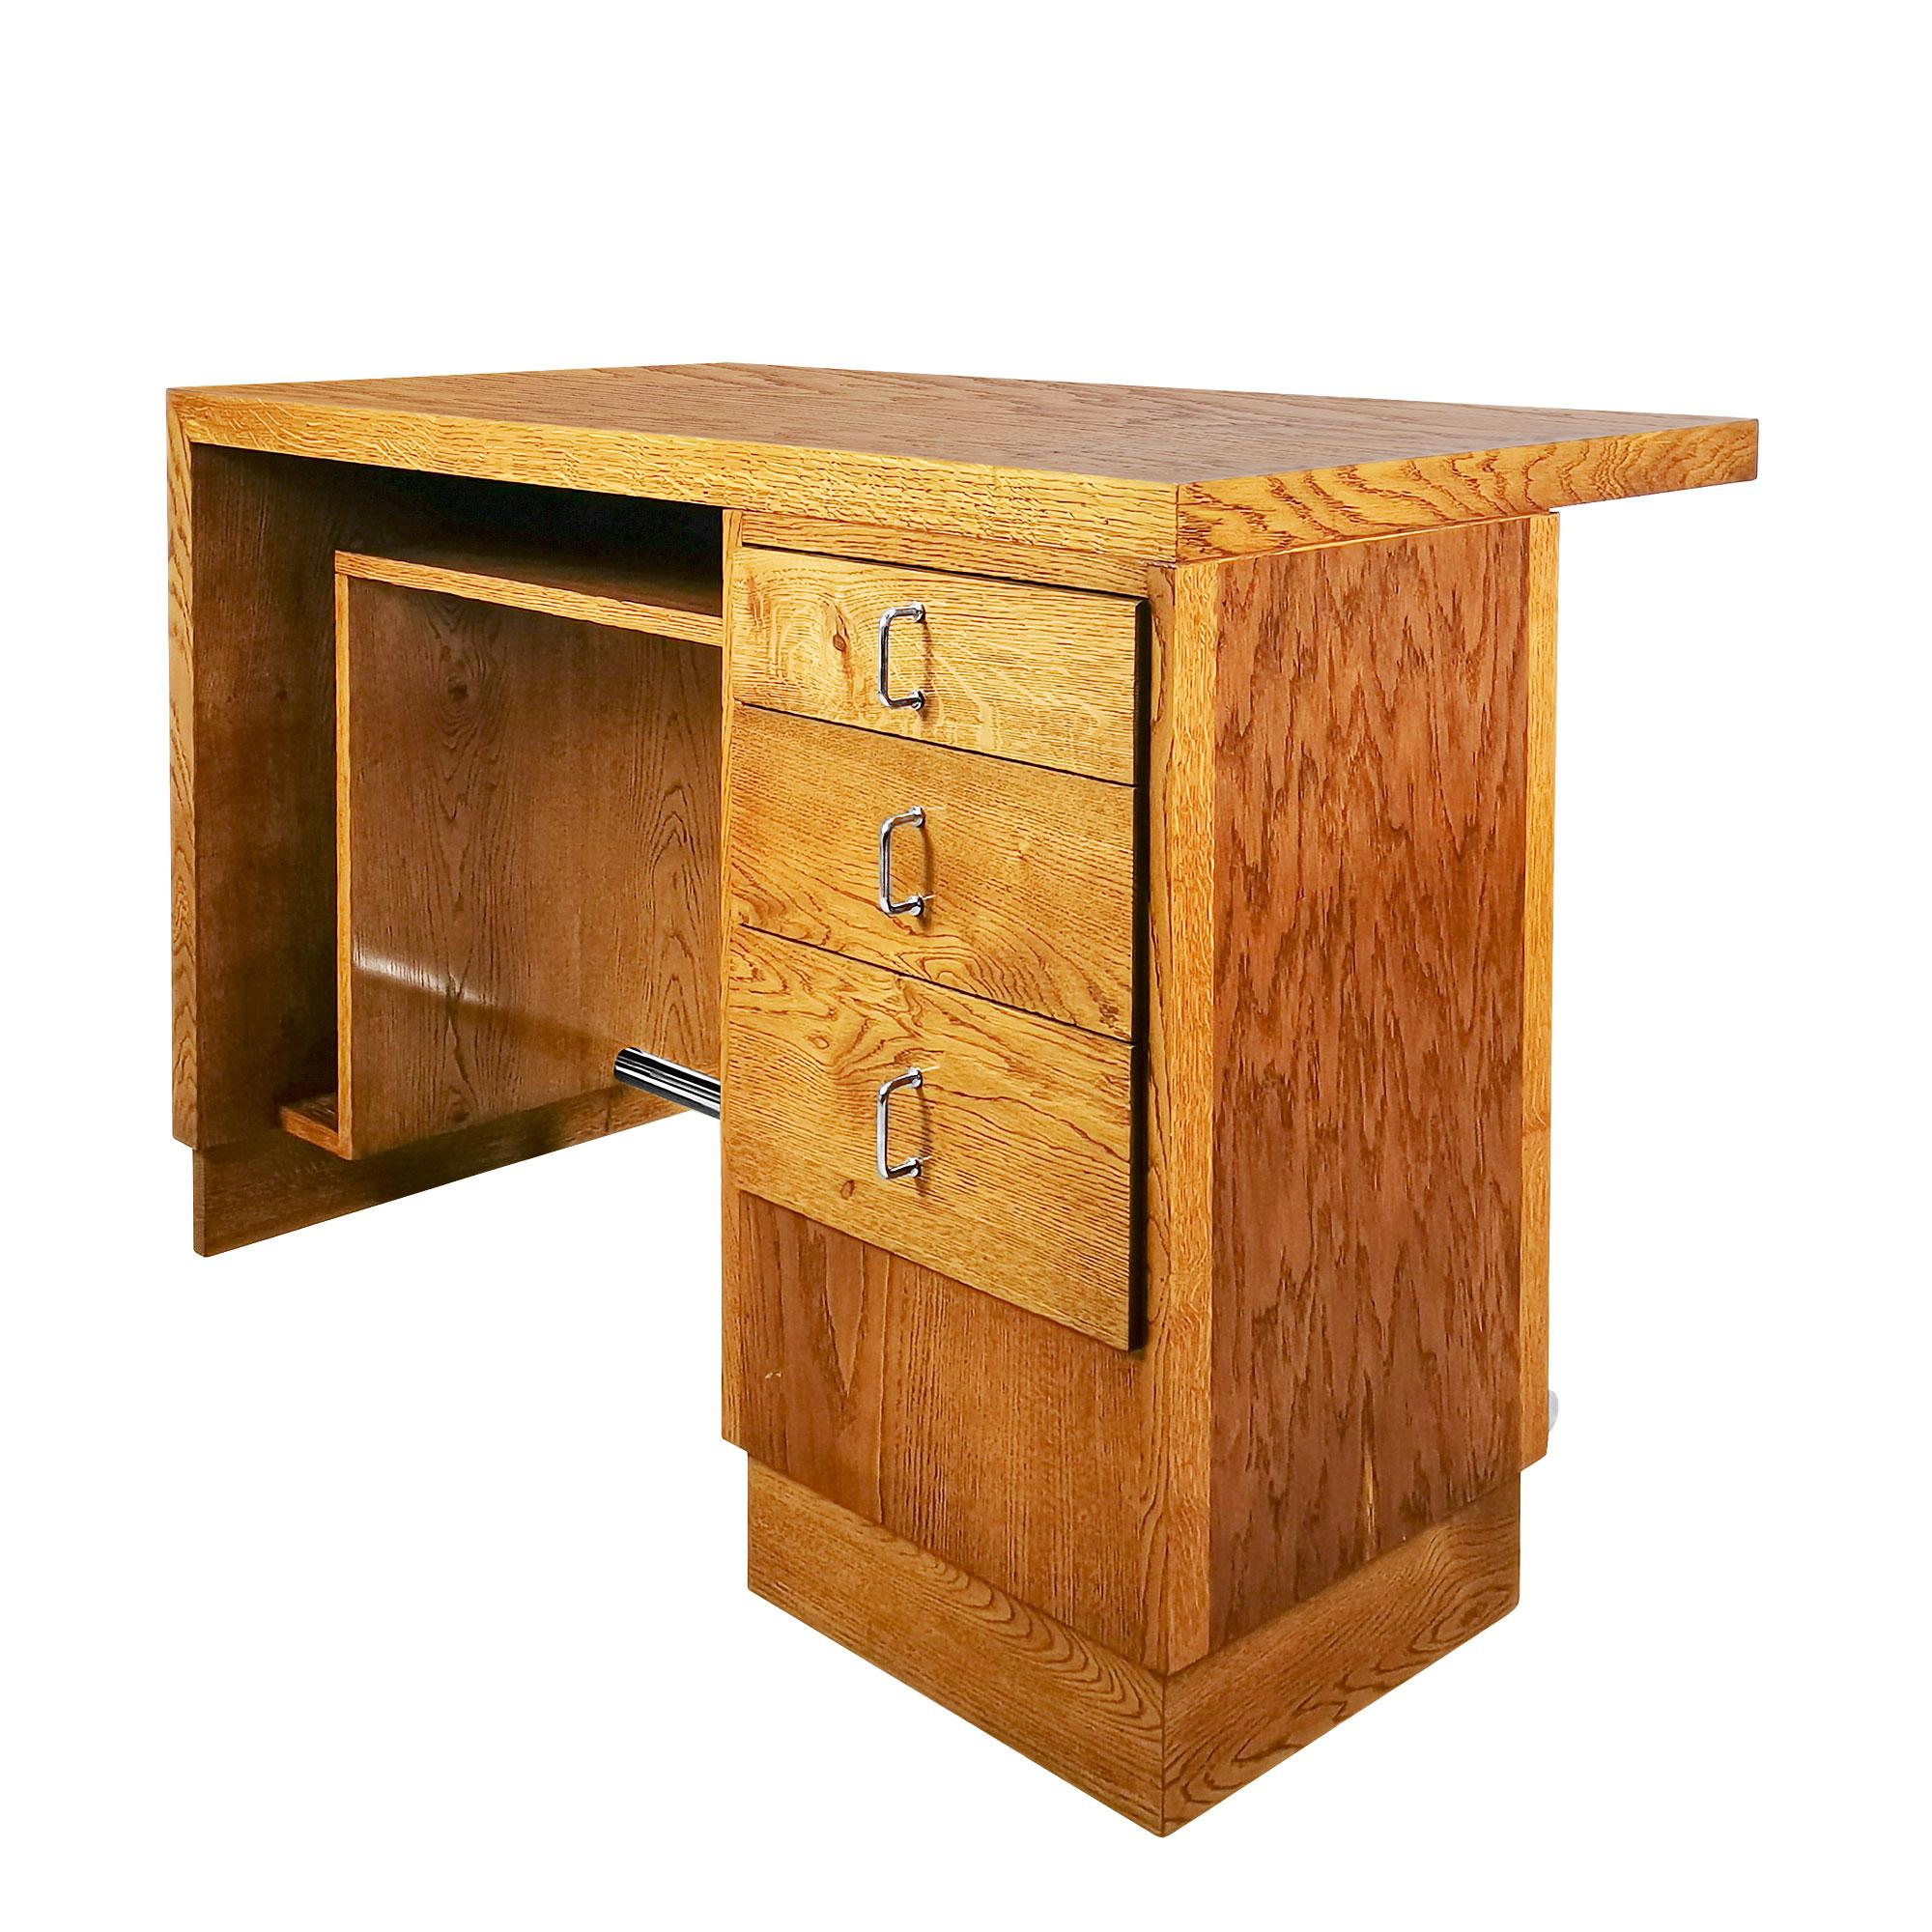 Small Art Deco cubist and double sided desk, solid oak and oak plywood, French polish. Three drawers and a shelve under the top, nickel plated steel tube and handles.
In the style of Francisque Chaleyssin. 

France, Lyon c. 1930.